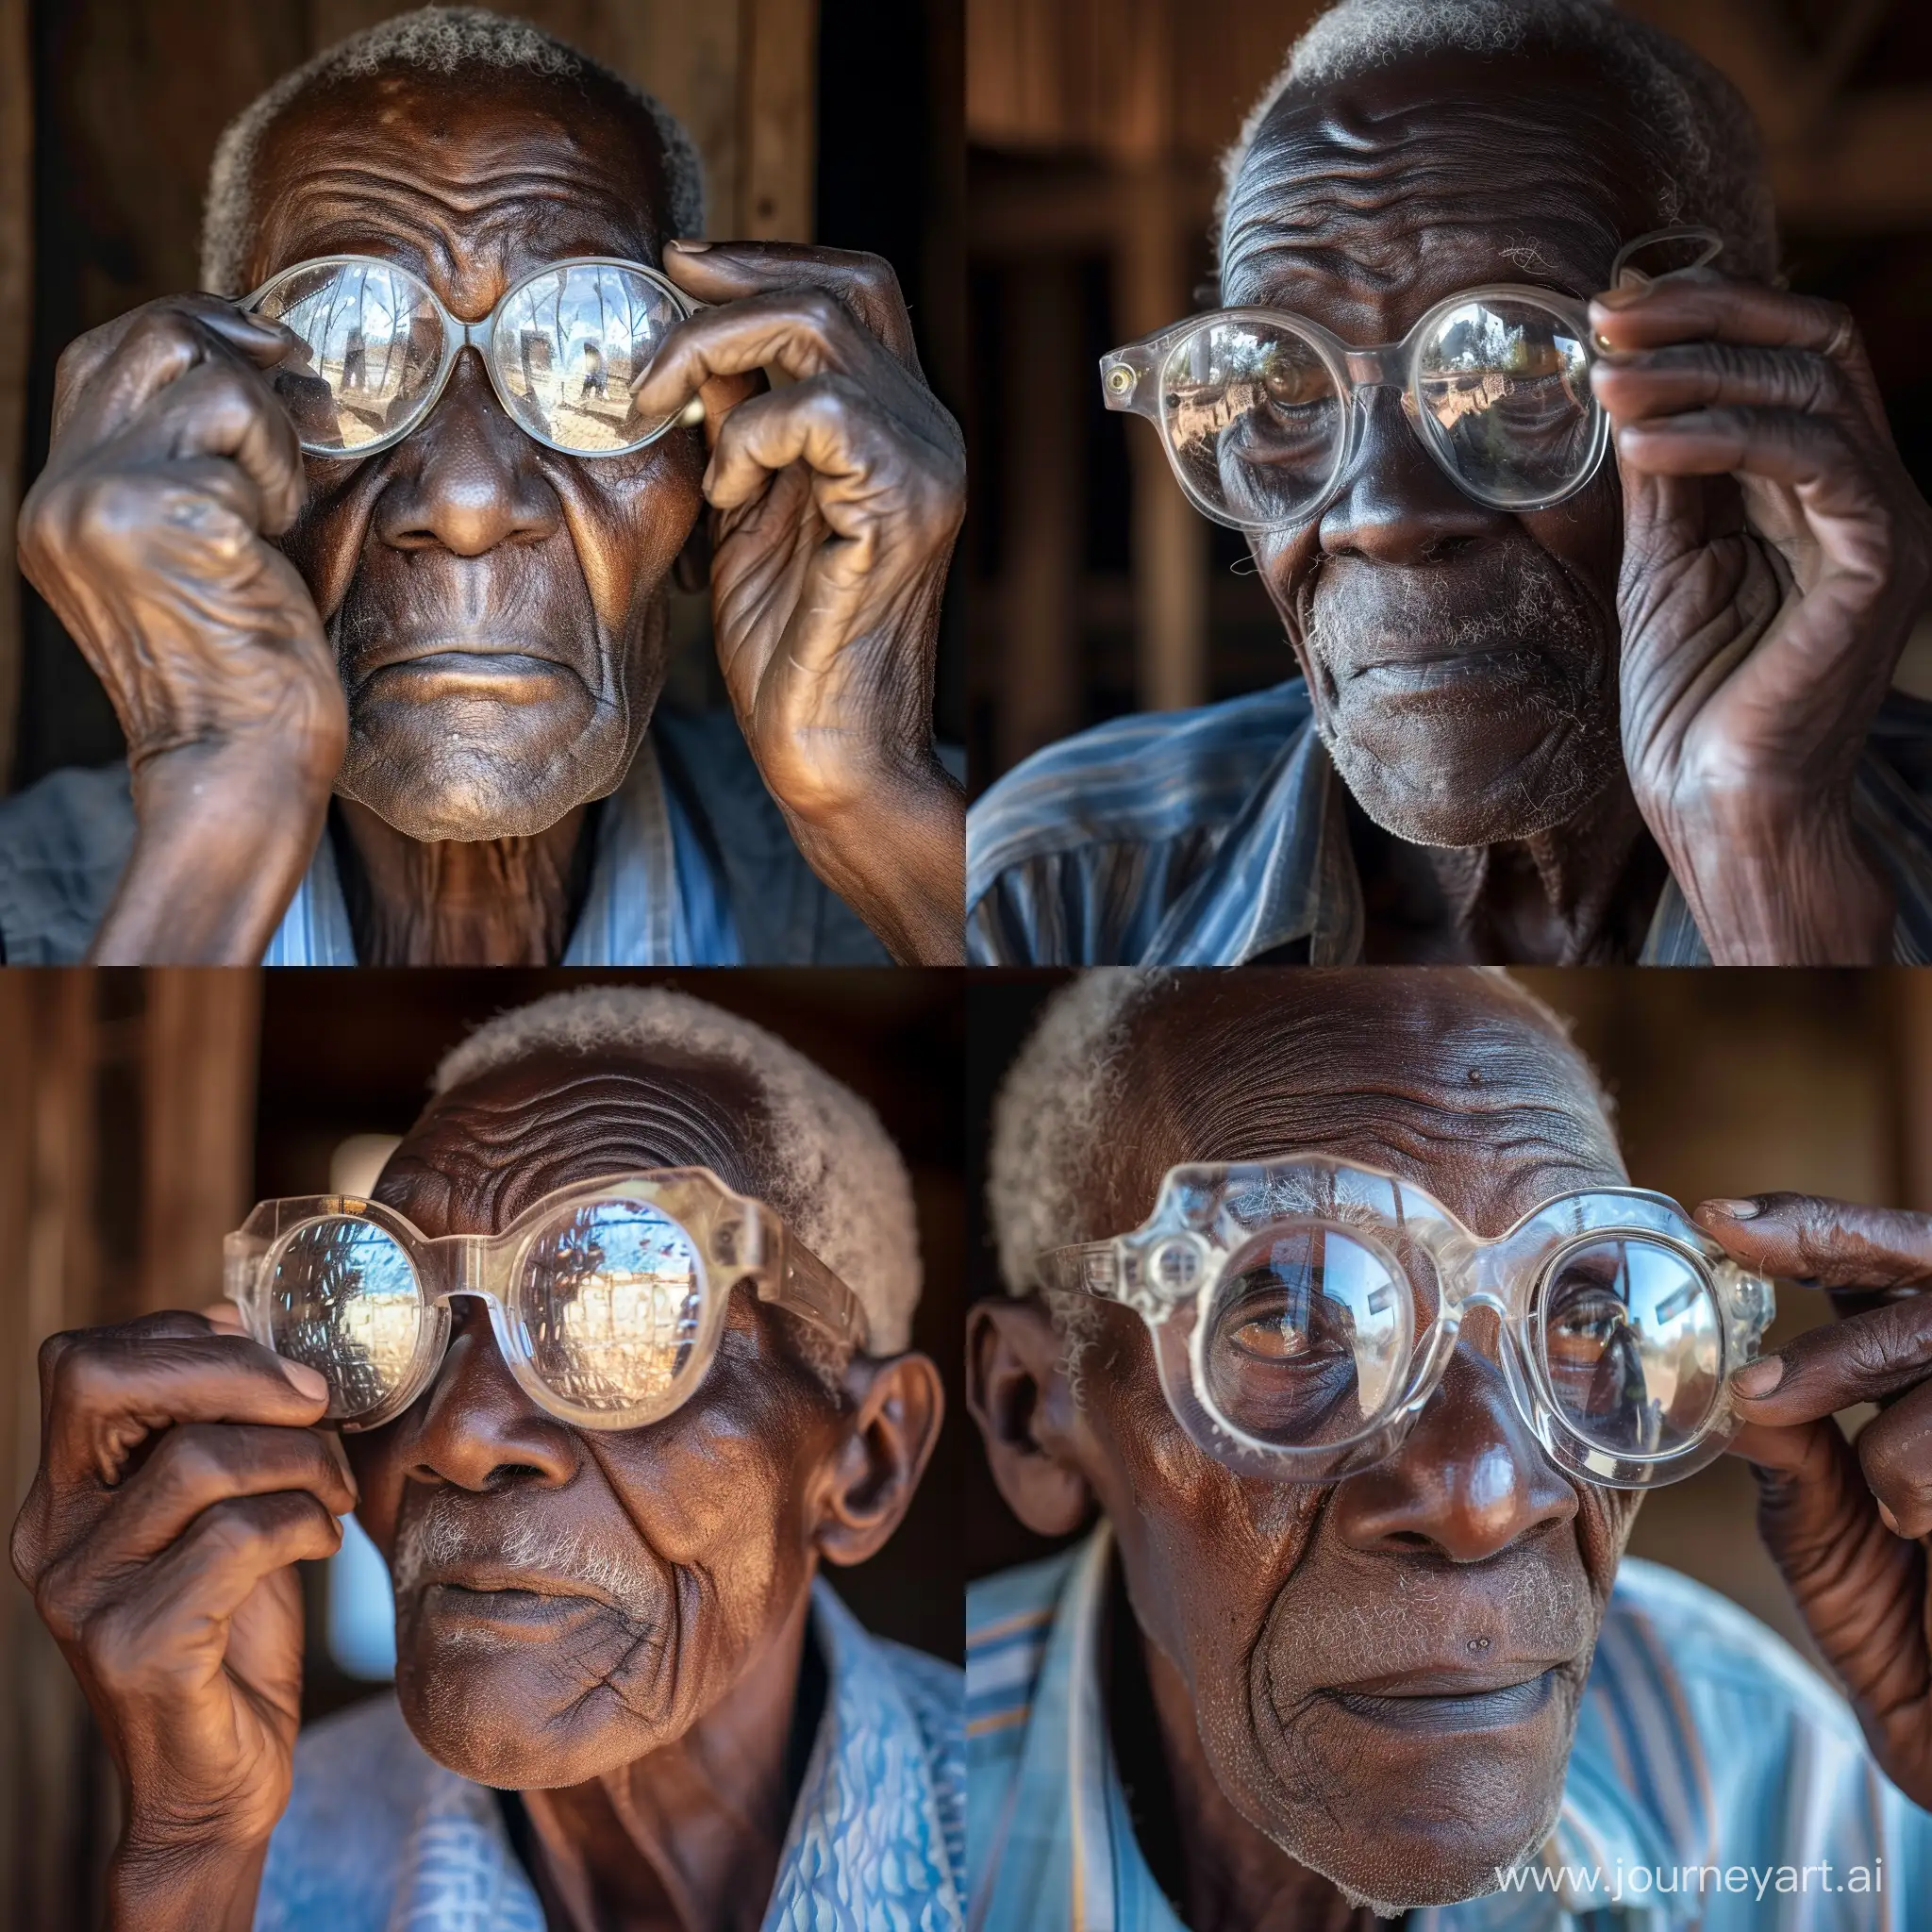 Old African man adjusting his old clear and reflective reading glasses.